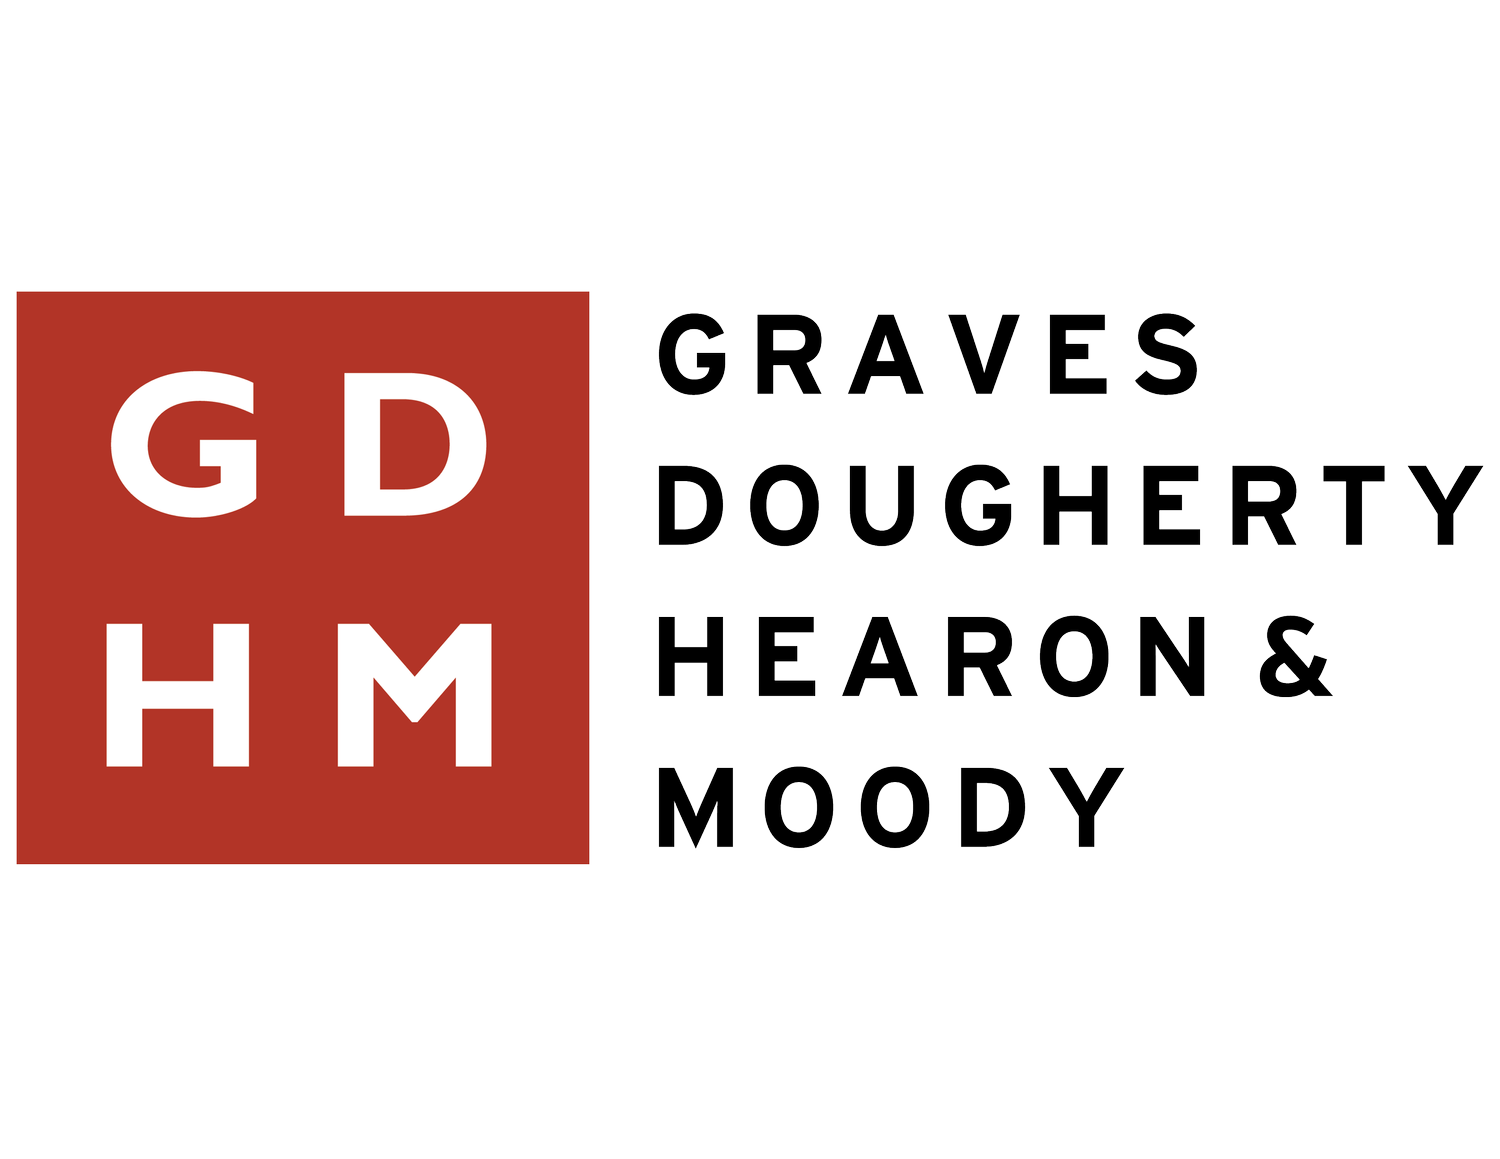 8th ANNUAL GDHM LAND & MINERAL OWNER SEMINAR